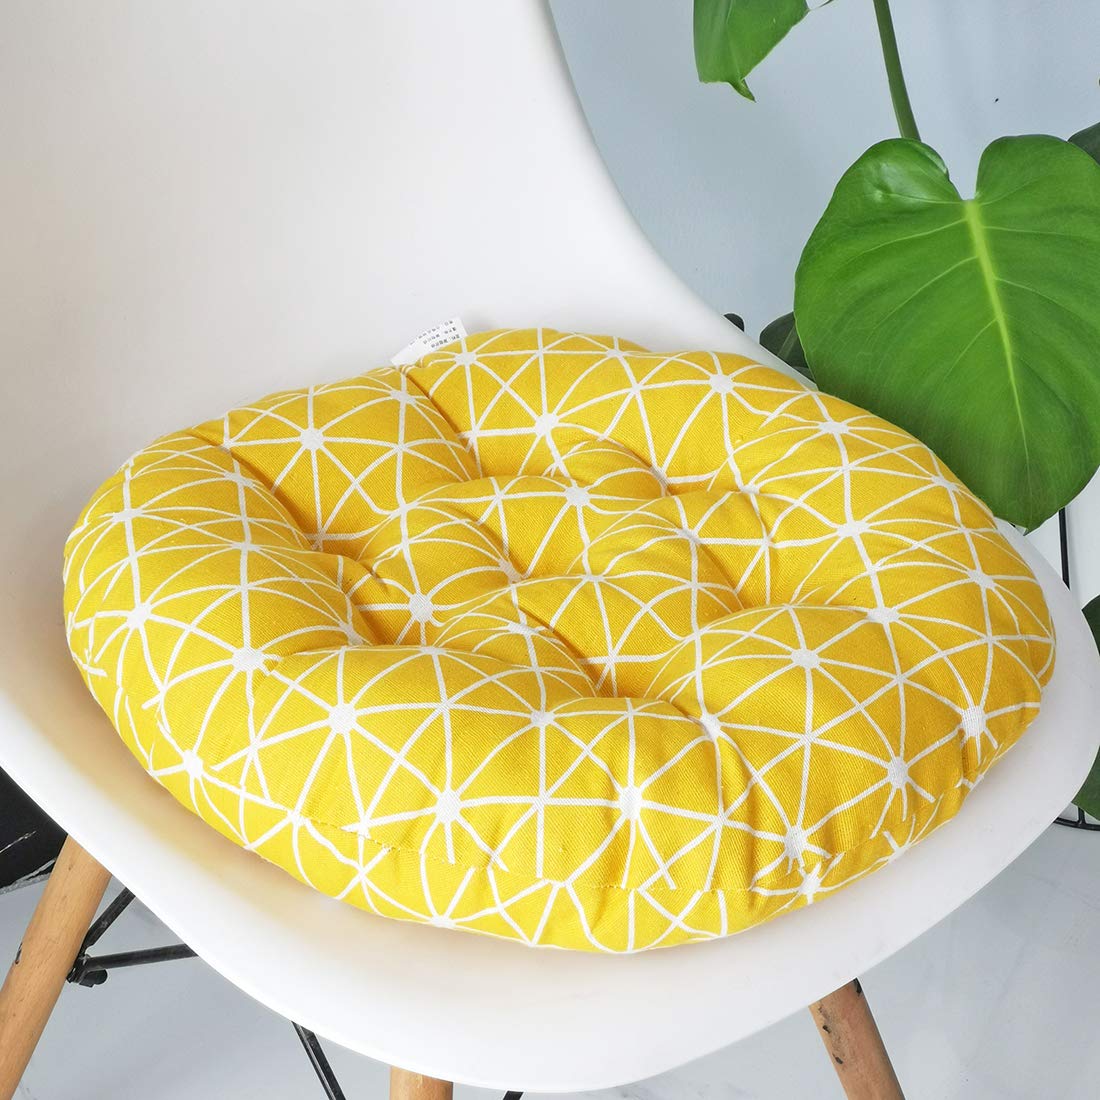 Vctops Bohemian Soft Round Chair Pad Garden Patio Home Kitchen Office Seat Cushion Grid Yellow Diameter 16